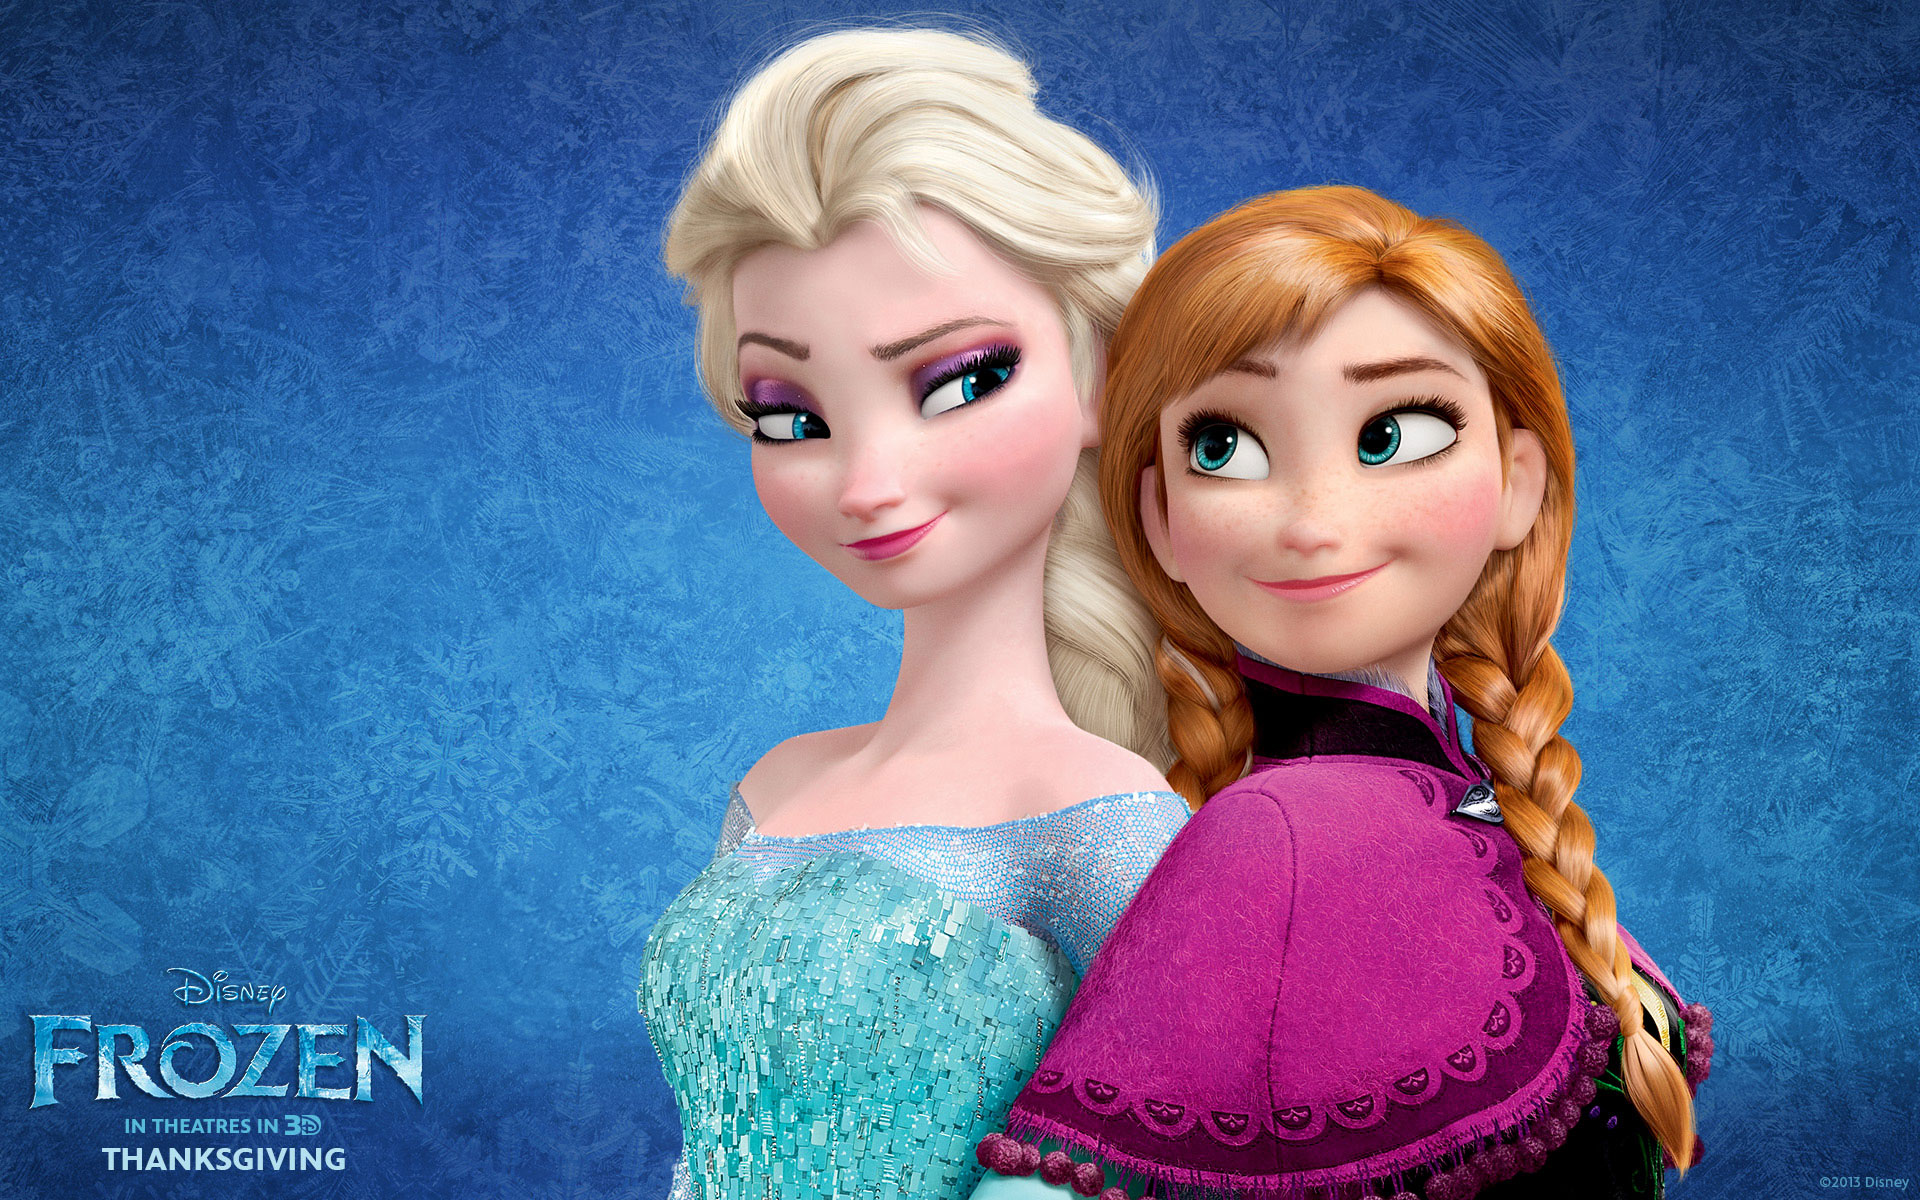  20131112frozen 2013 movie wallpapers hd facebook timeline covers